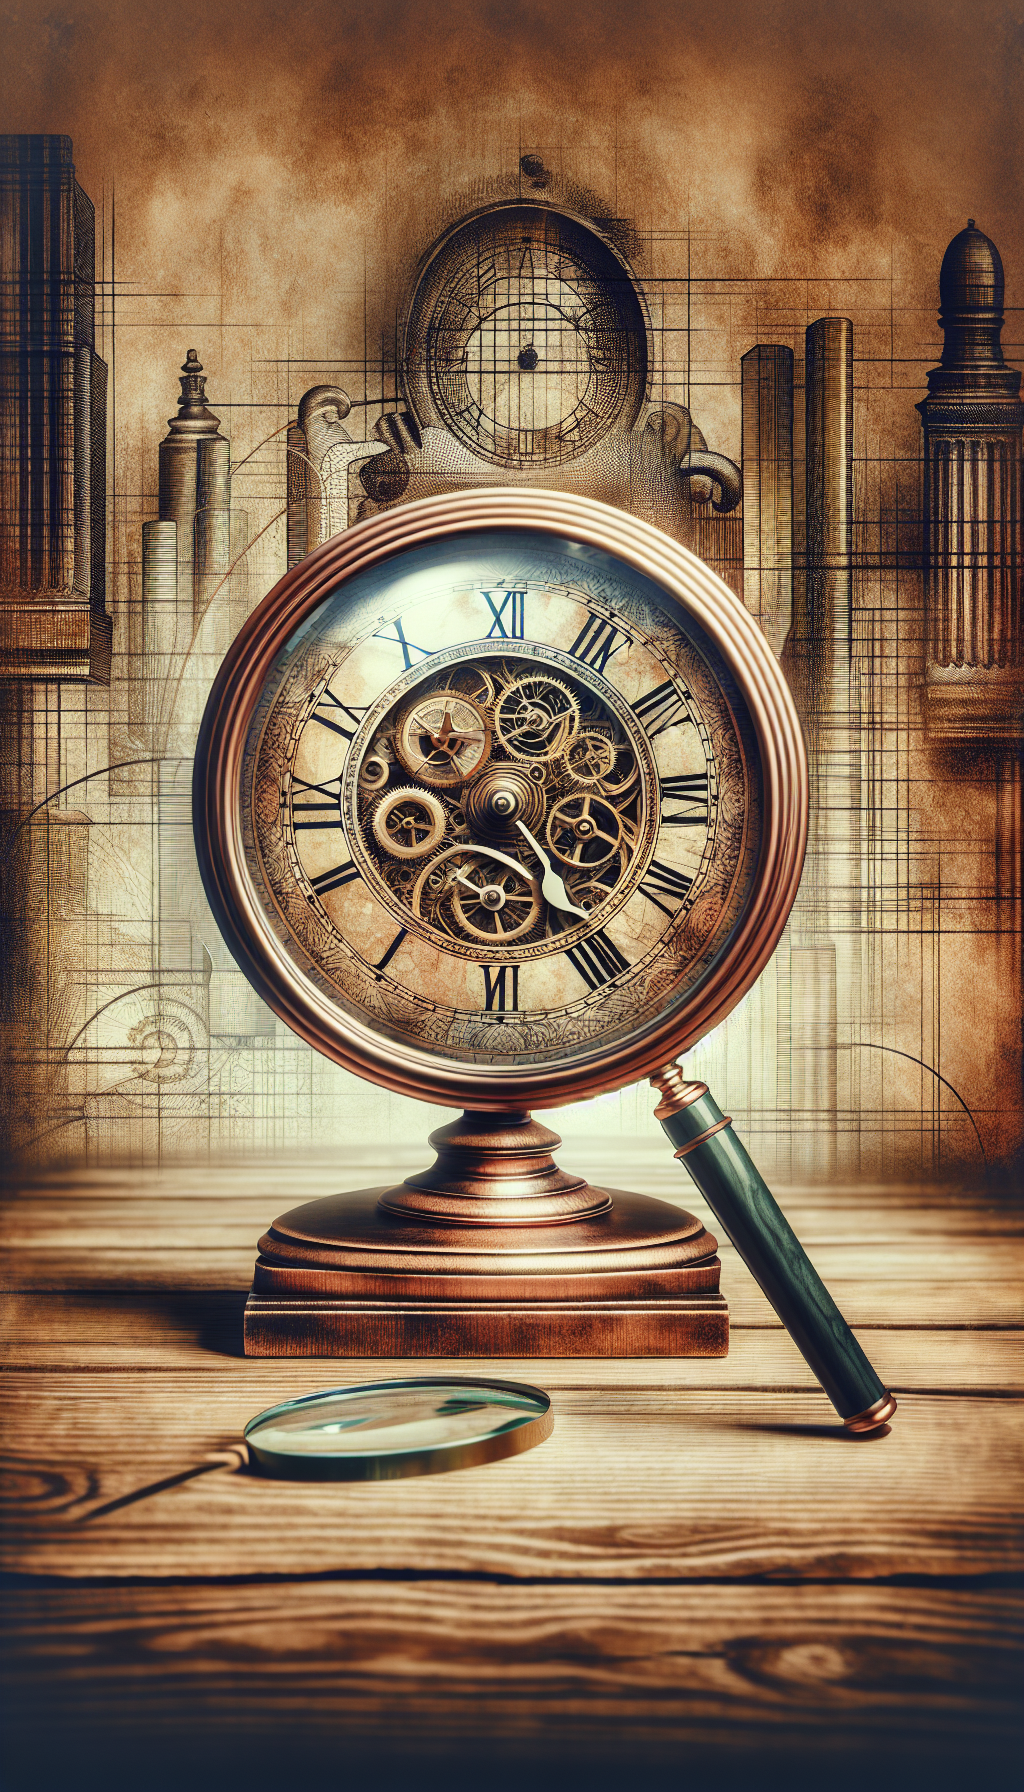 An ornate antique mantel clock sits center frame, its face intricately detailed with roman numerals and delicate hands. A magnifying glass hovers over it, revealing a pattern of hidden gears and symbols underneath its surface, symbolizing the 'decoding'. The background shifts from cross-hatched vintage texture to crisp modern lines, contrasting the old with the tools of modern investigation.